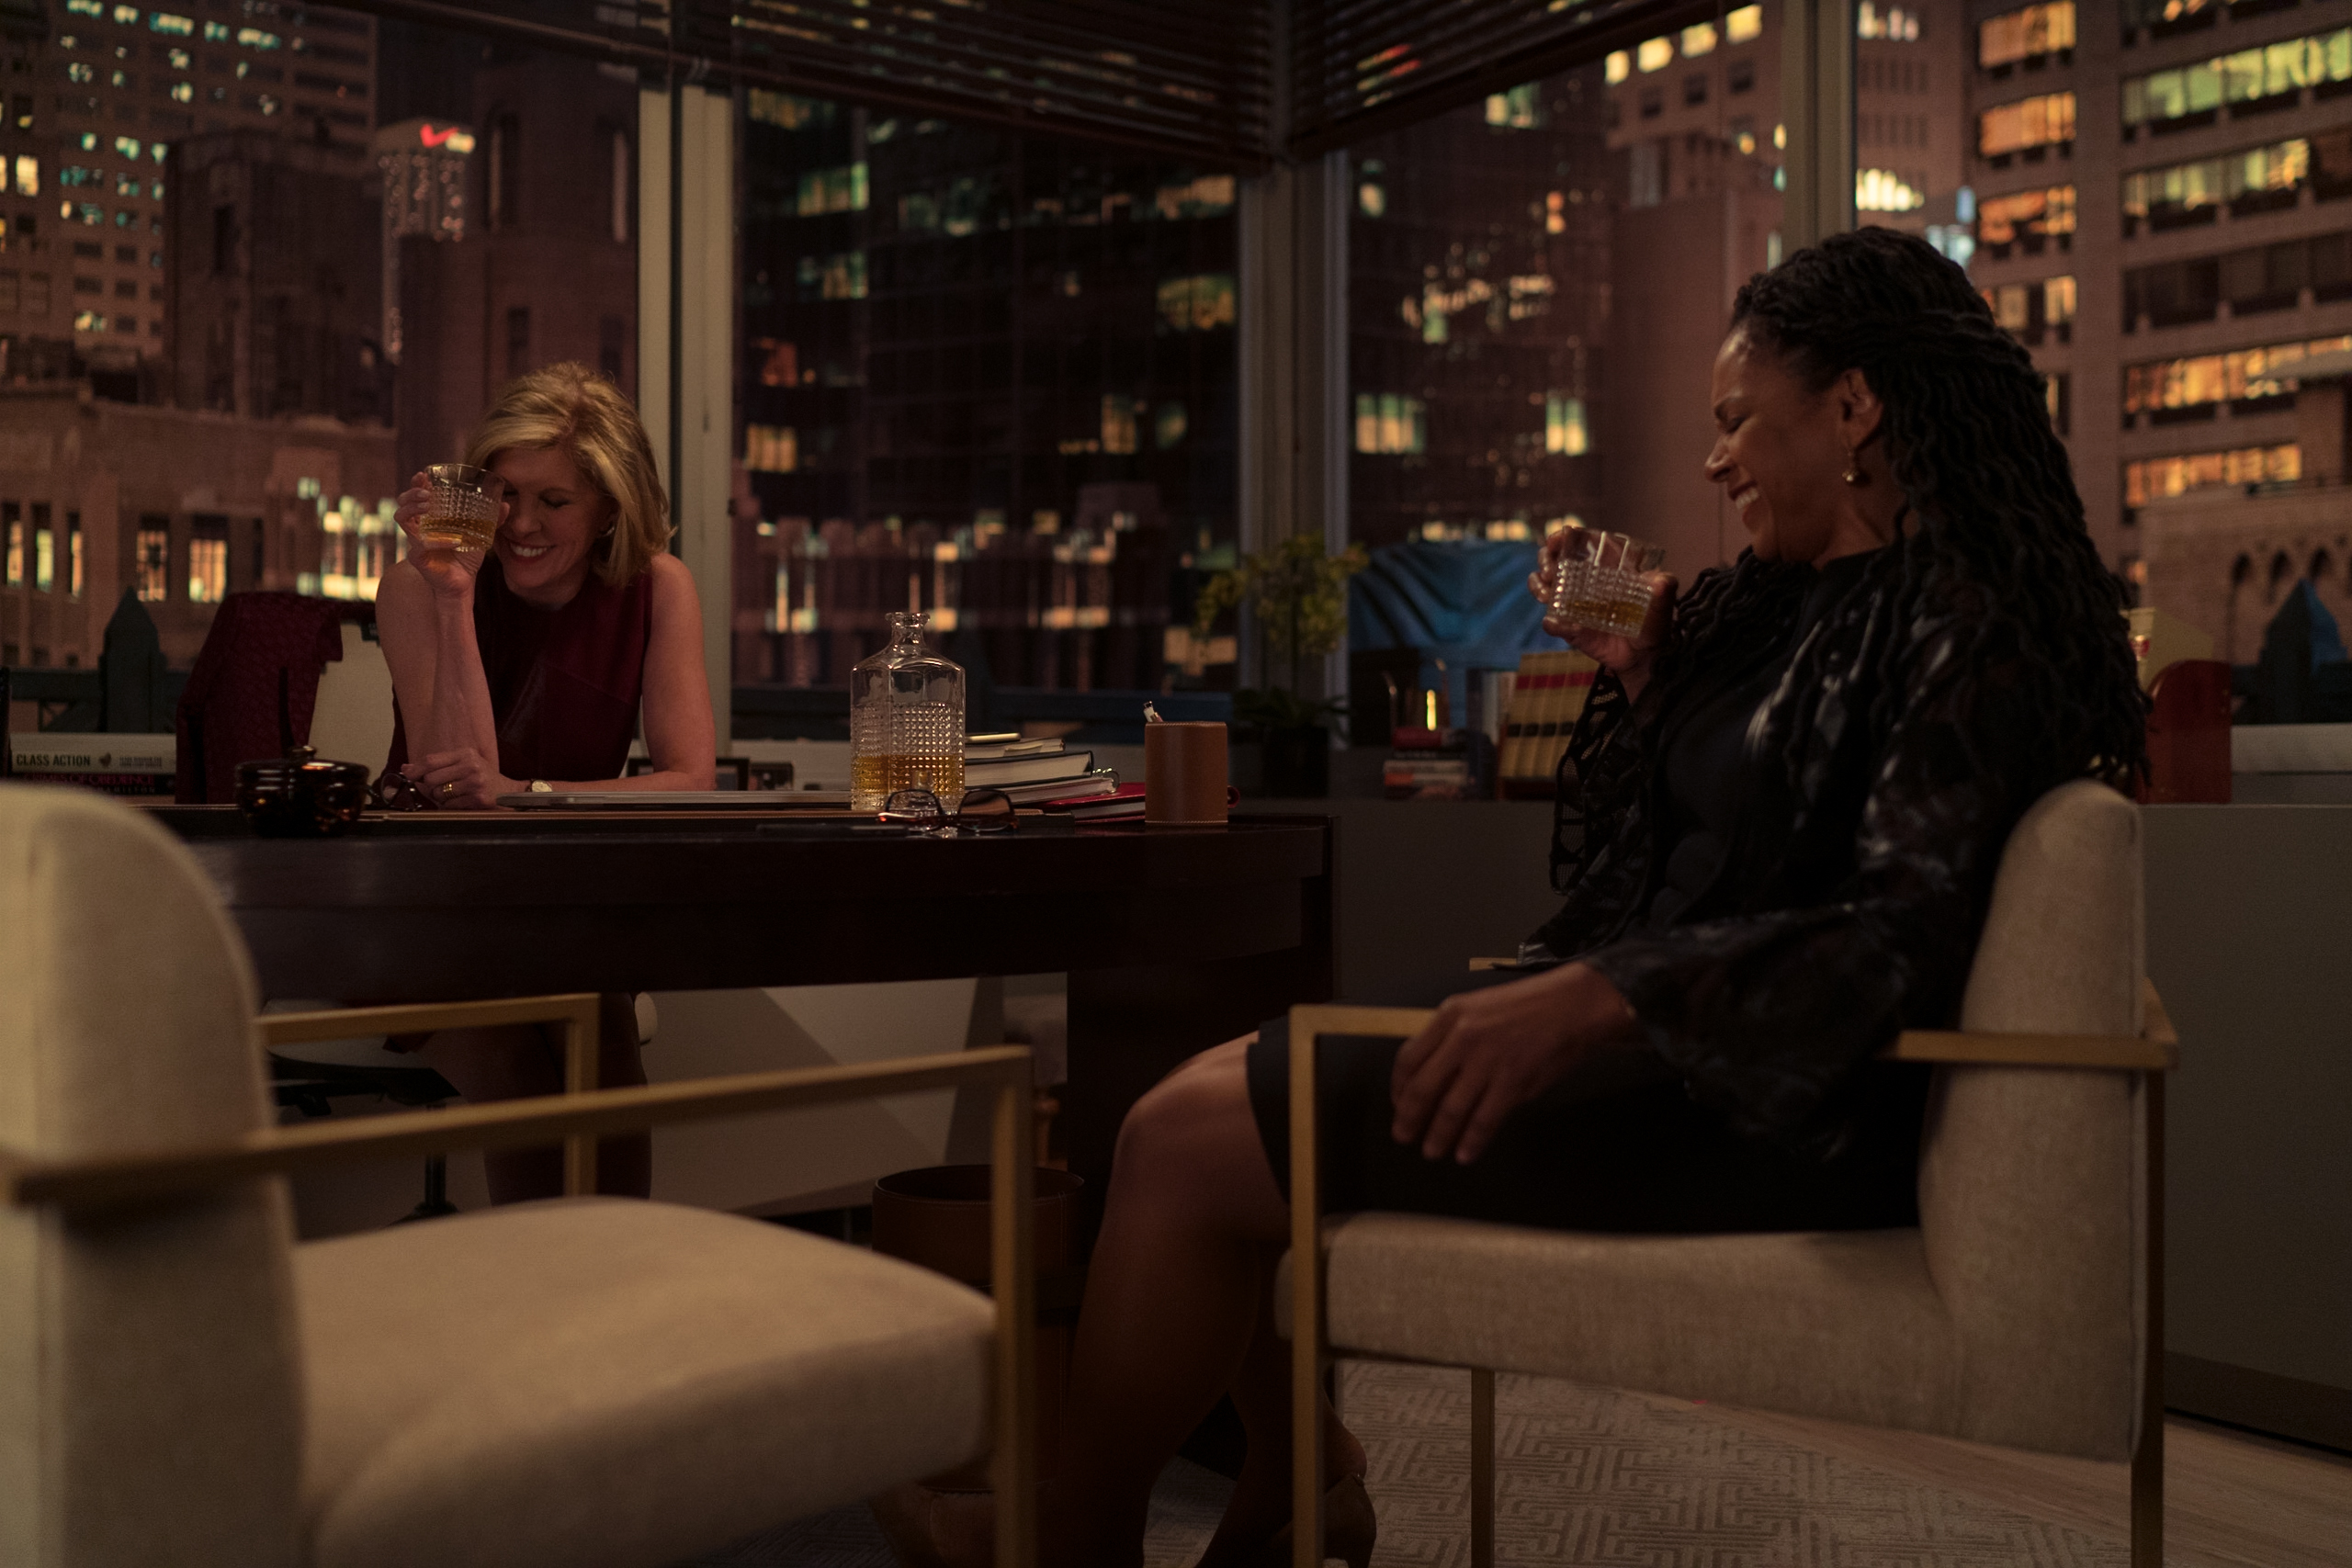 The Good Fight 6x07 "The End of STR Laurie" Christine Baranski as Diane Lockhart and Audra McDonald as Liz Reddick in The Good Fight episode 7, Season 6 streaming on Paramount+, 2022. Photo Credit: Elizabeth Fisher/Paramount+.